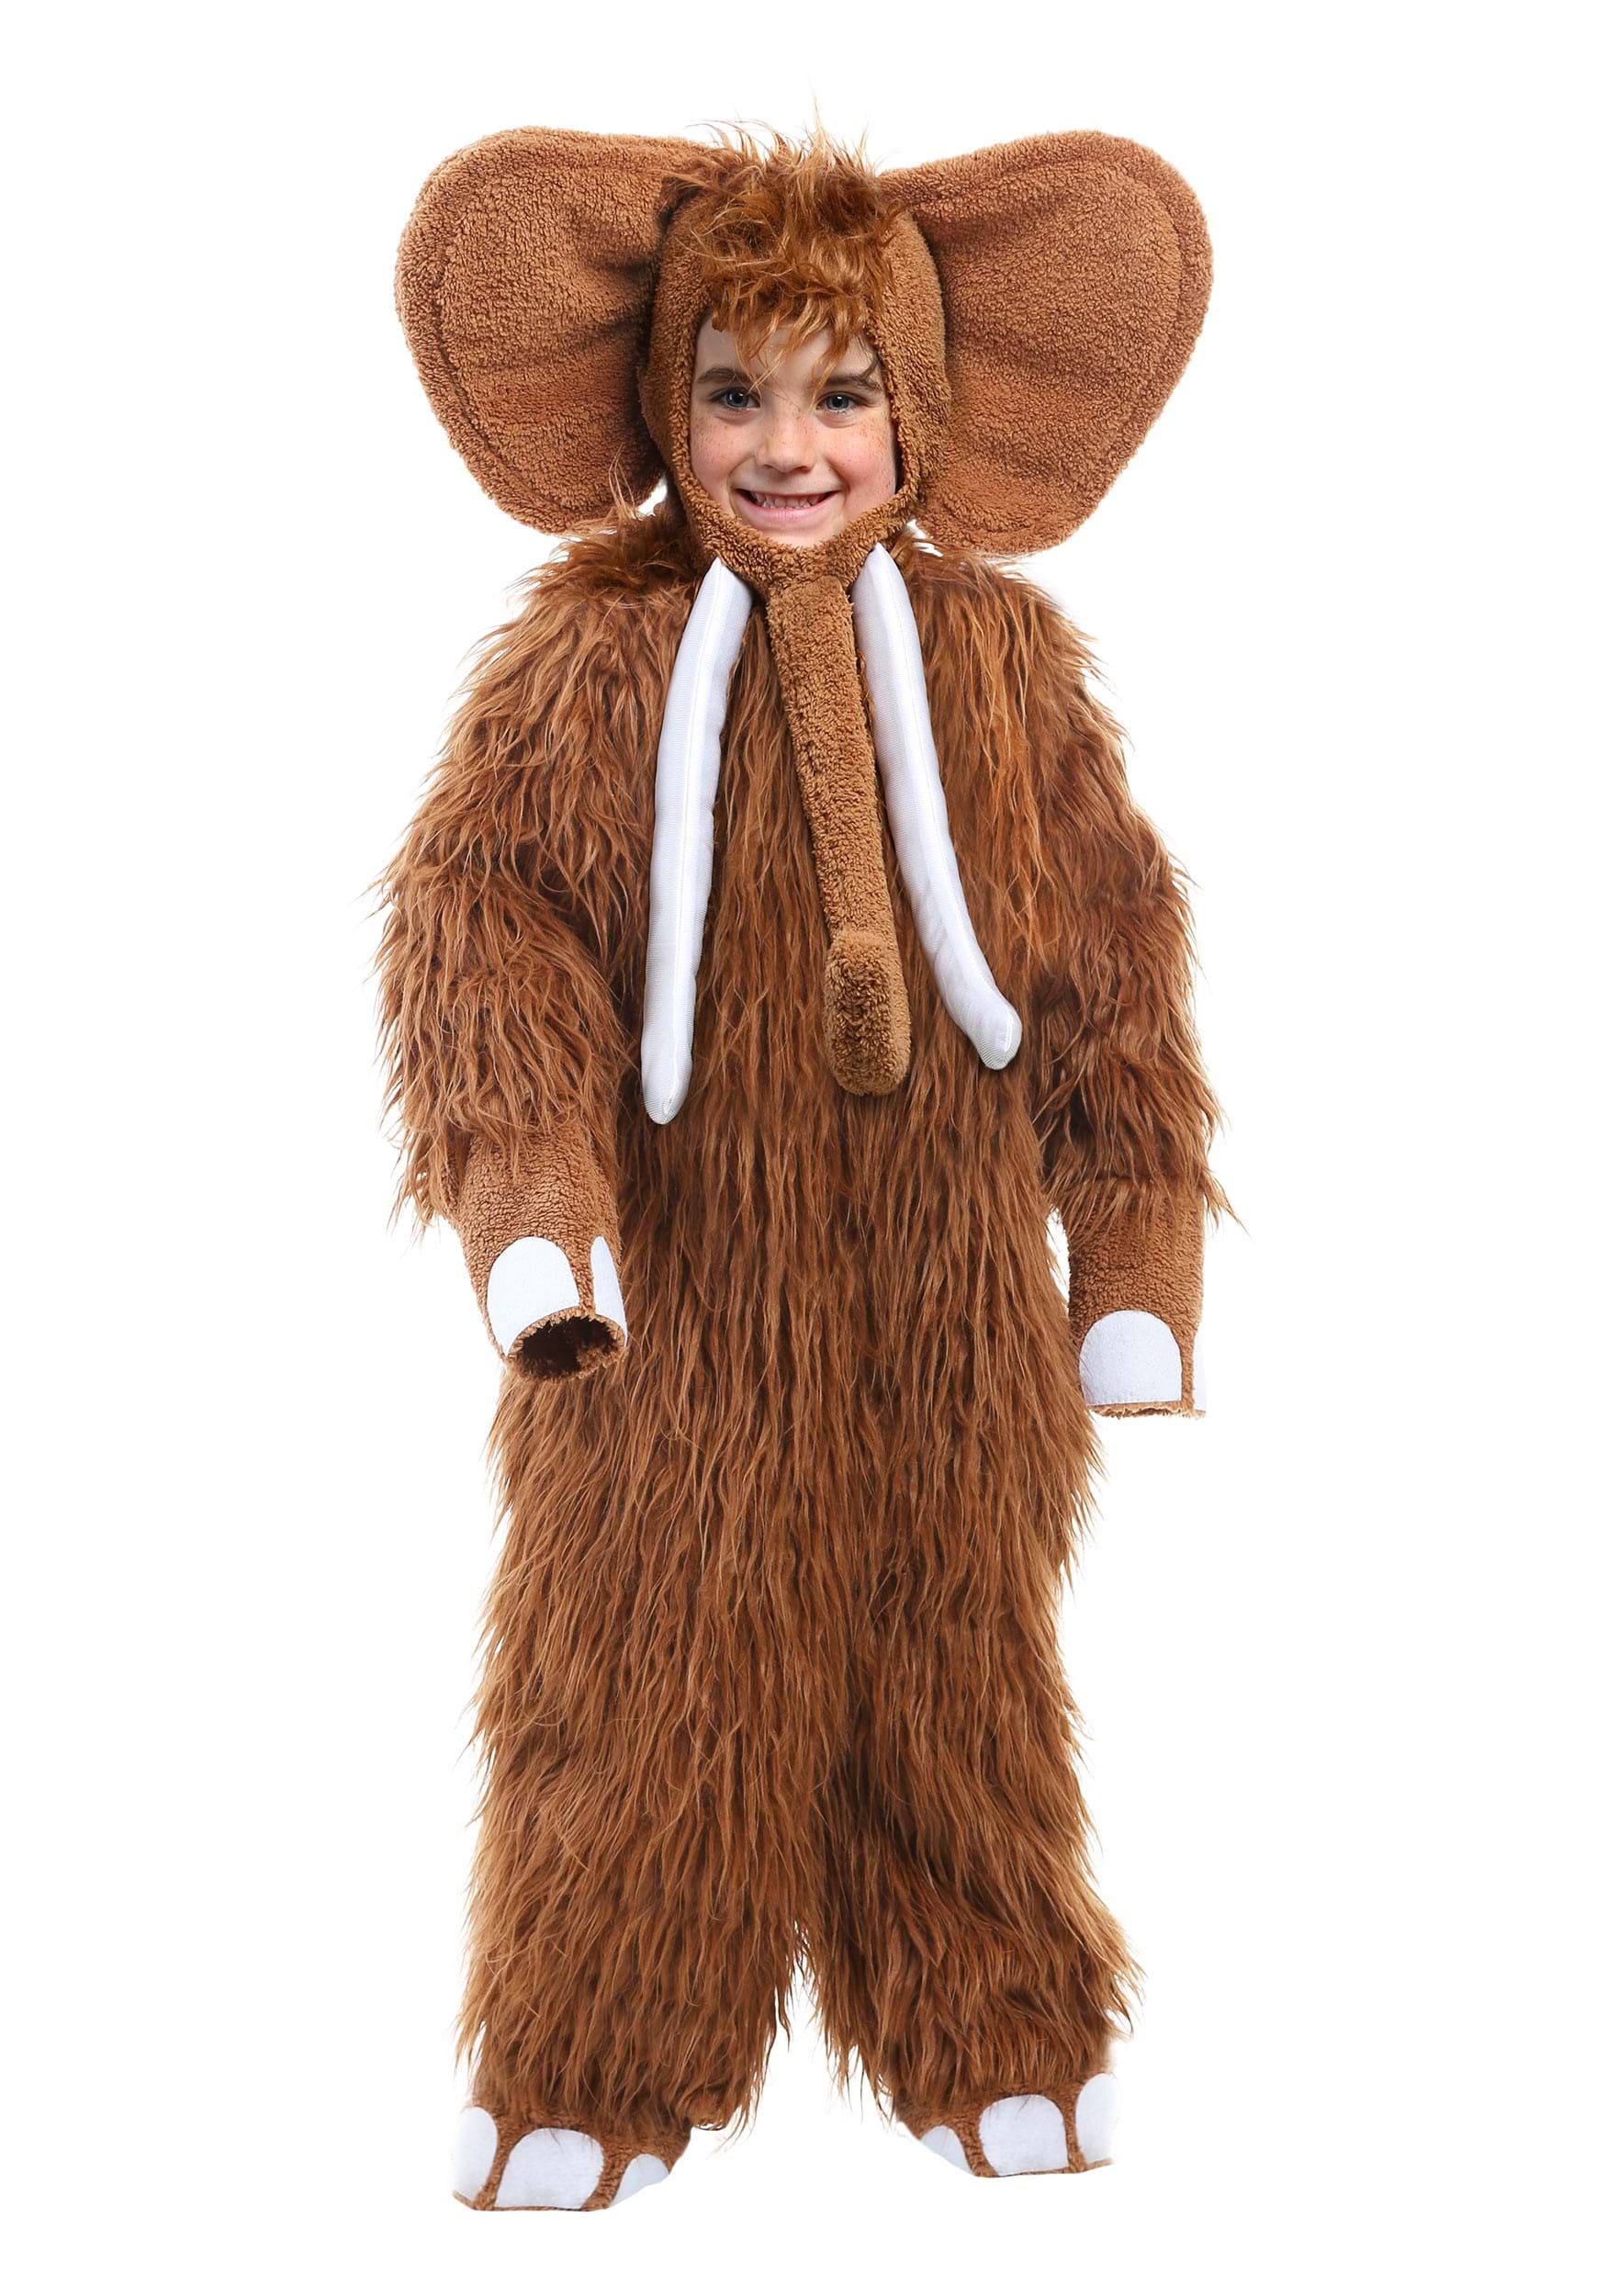 Woolly Mammoth Costume for Boys